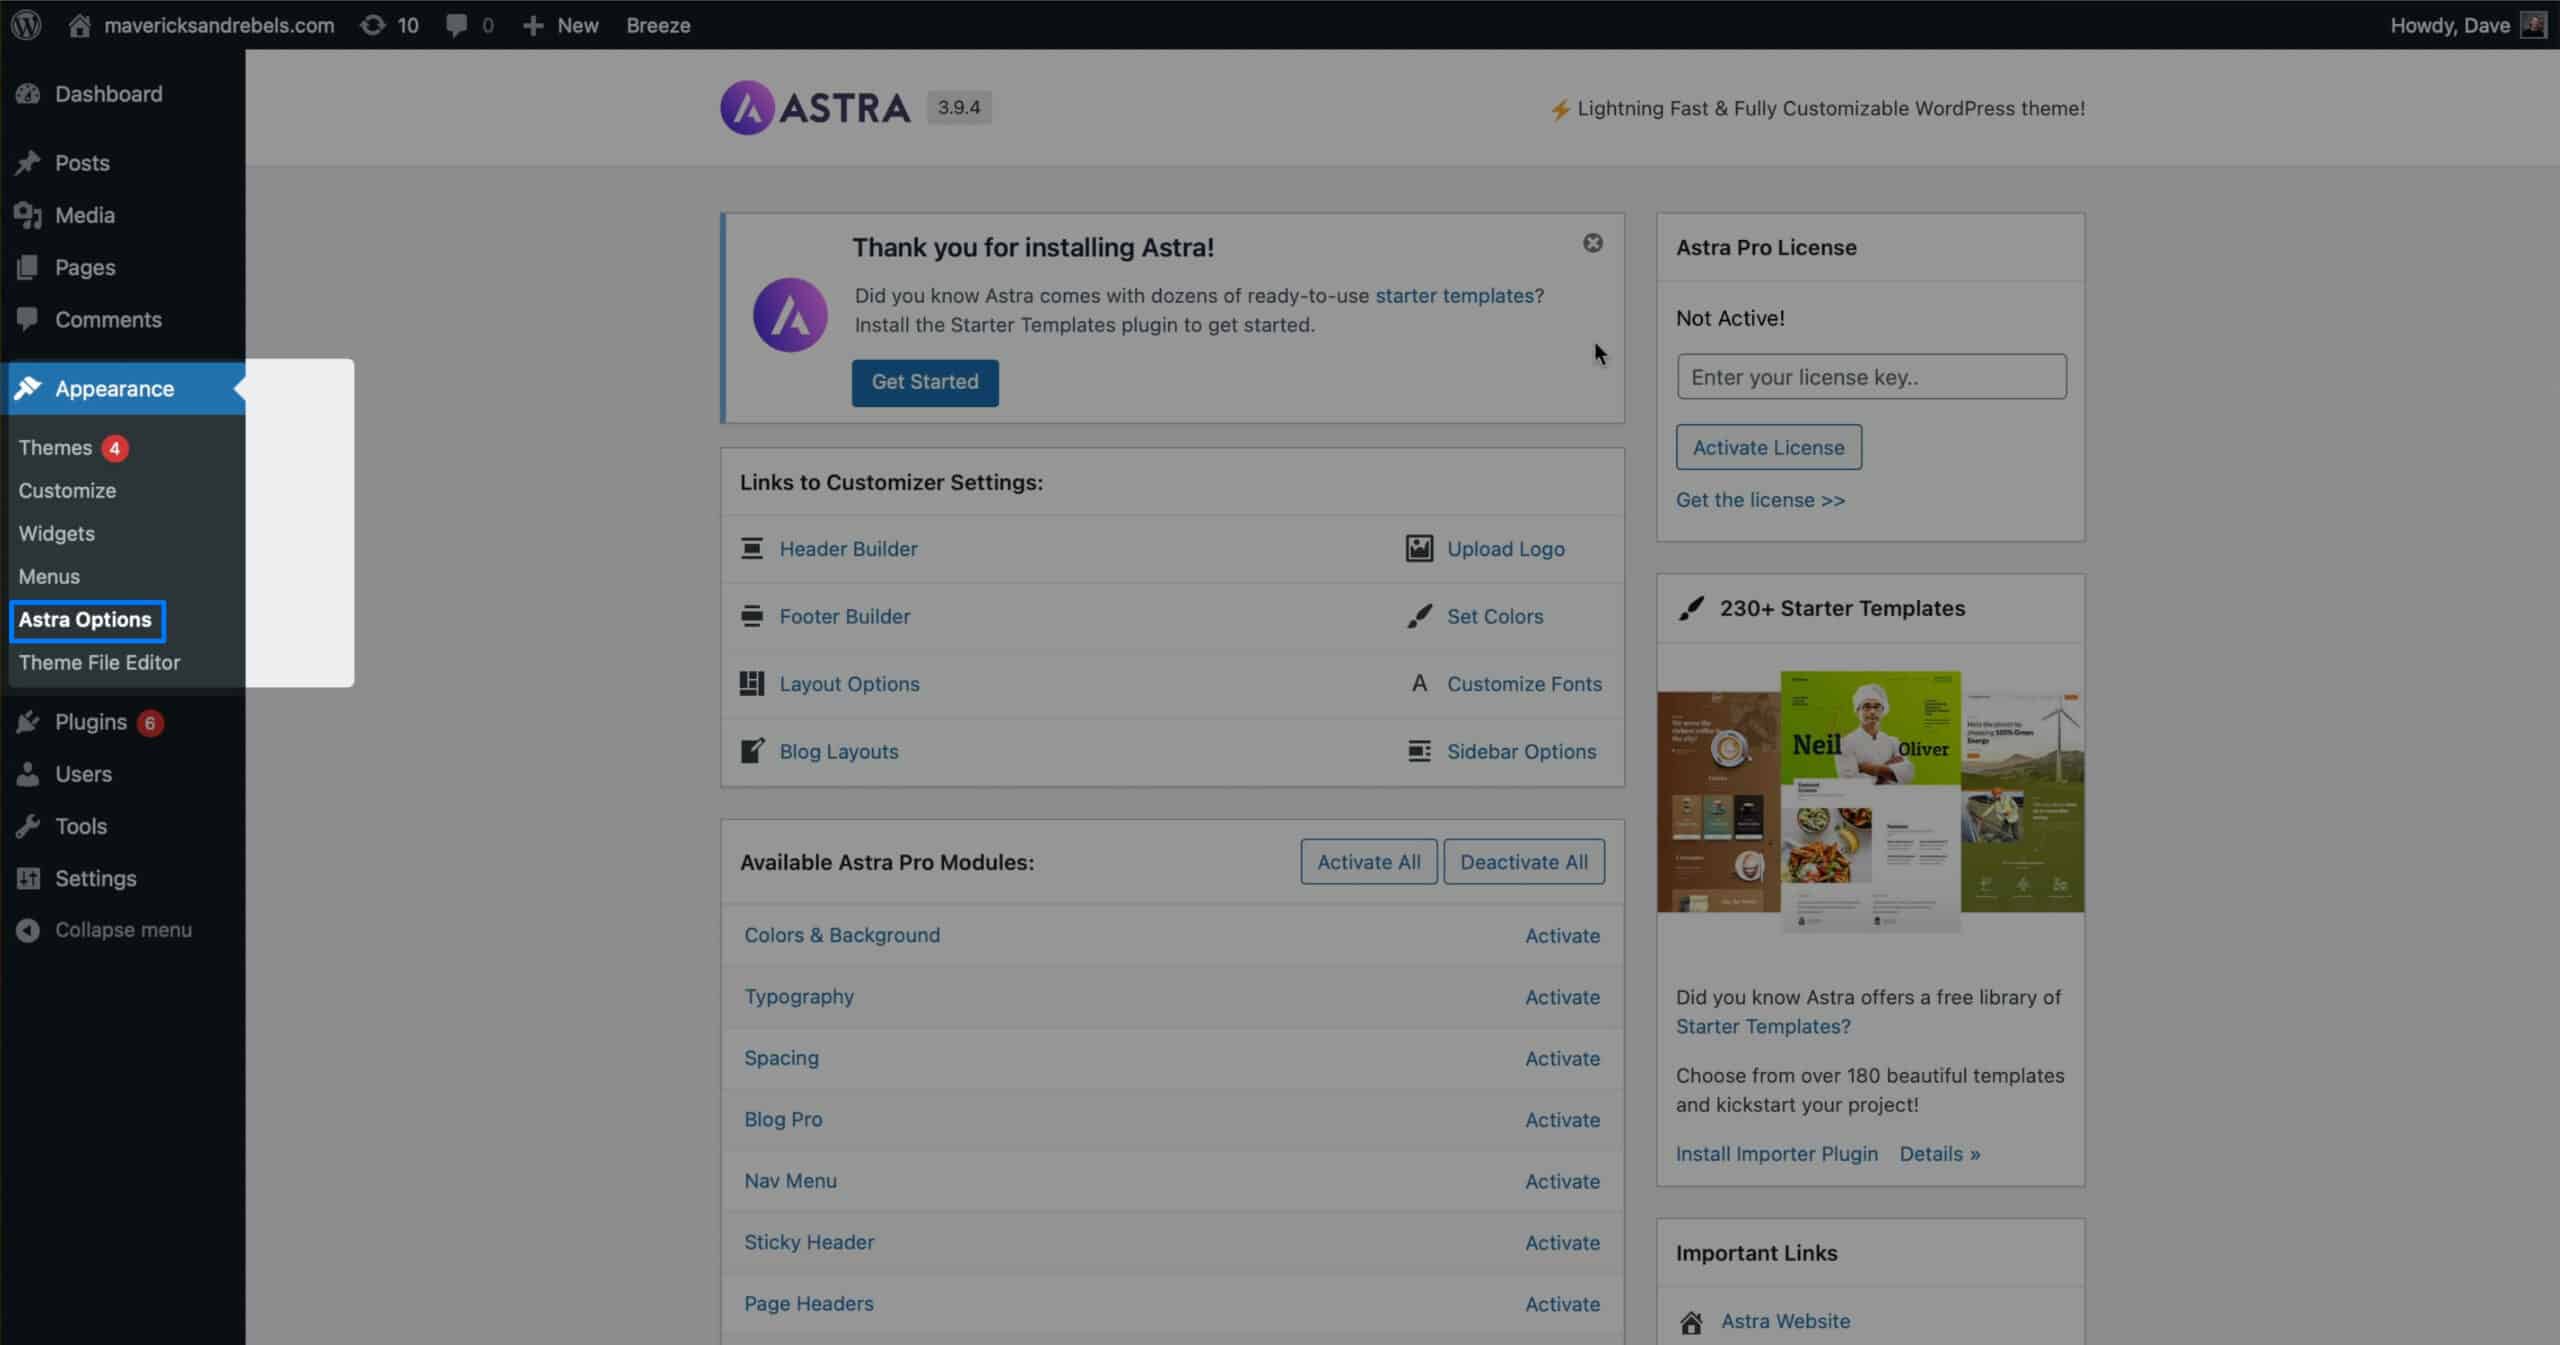 Accessing Astra Options under Appearance